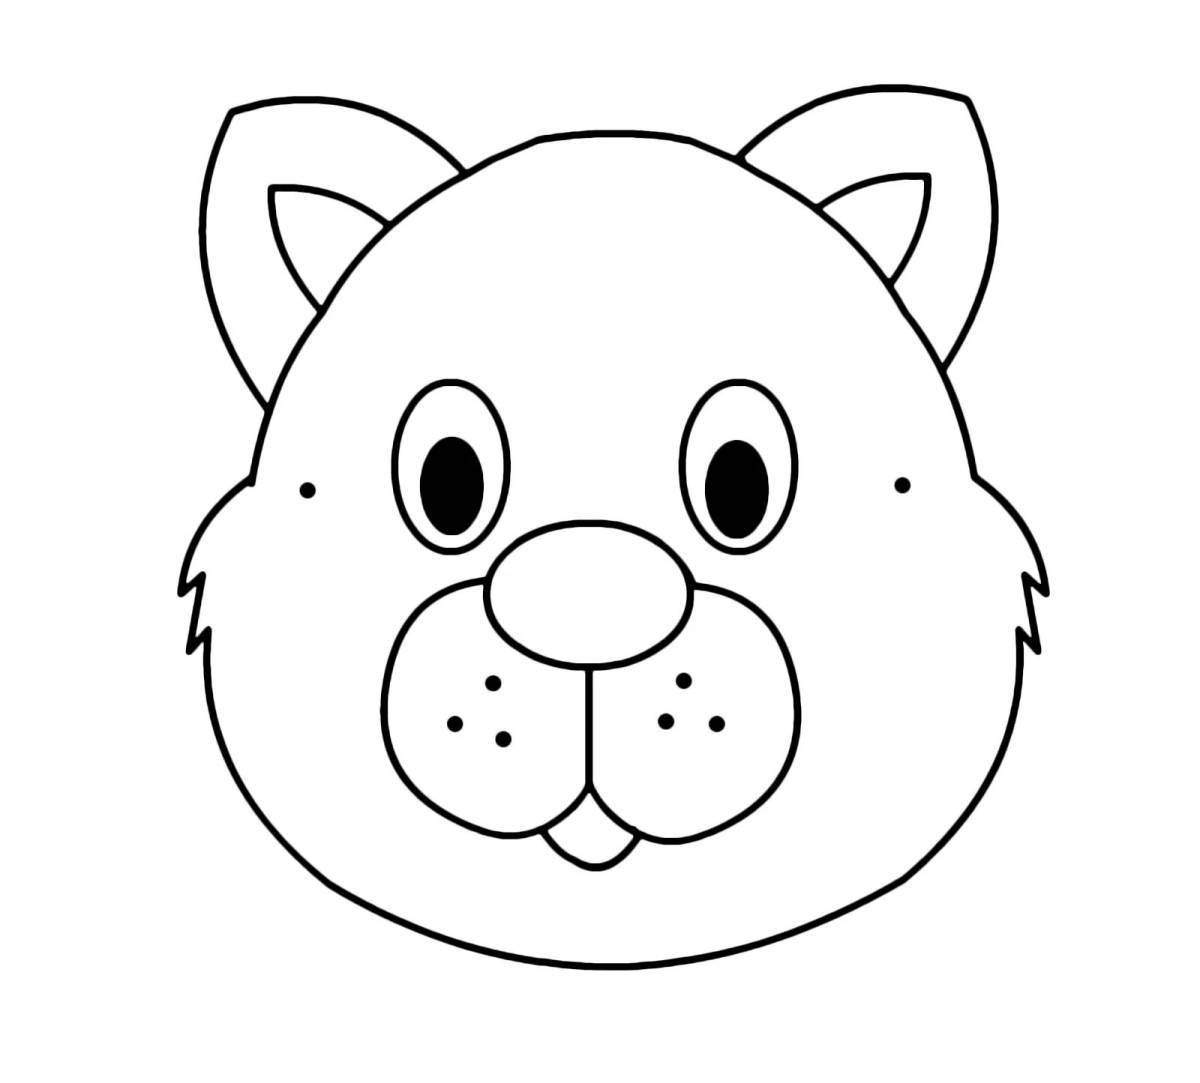 Coloring book bright animal head mask for kids